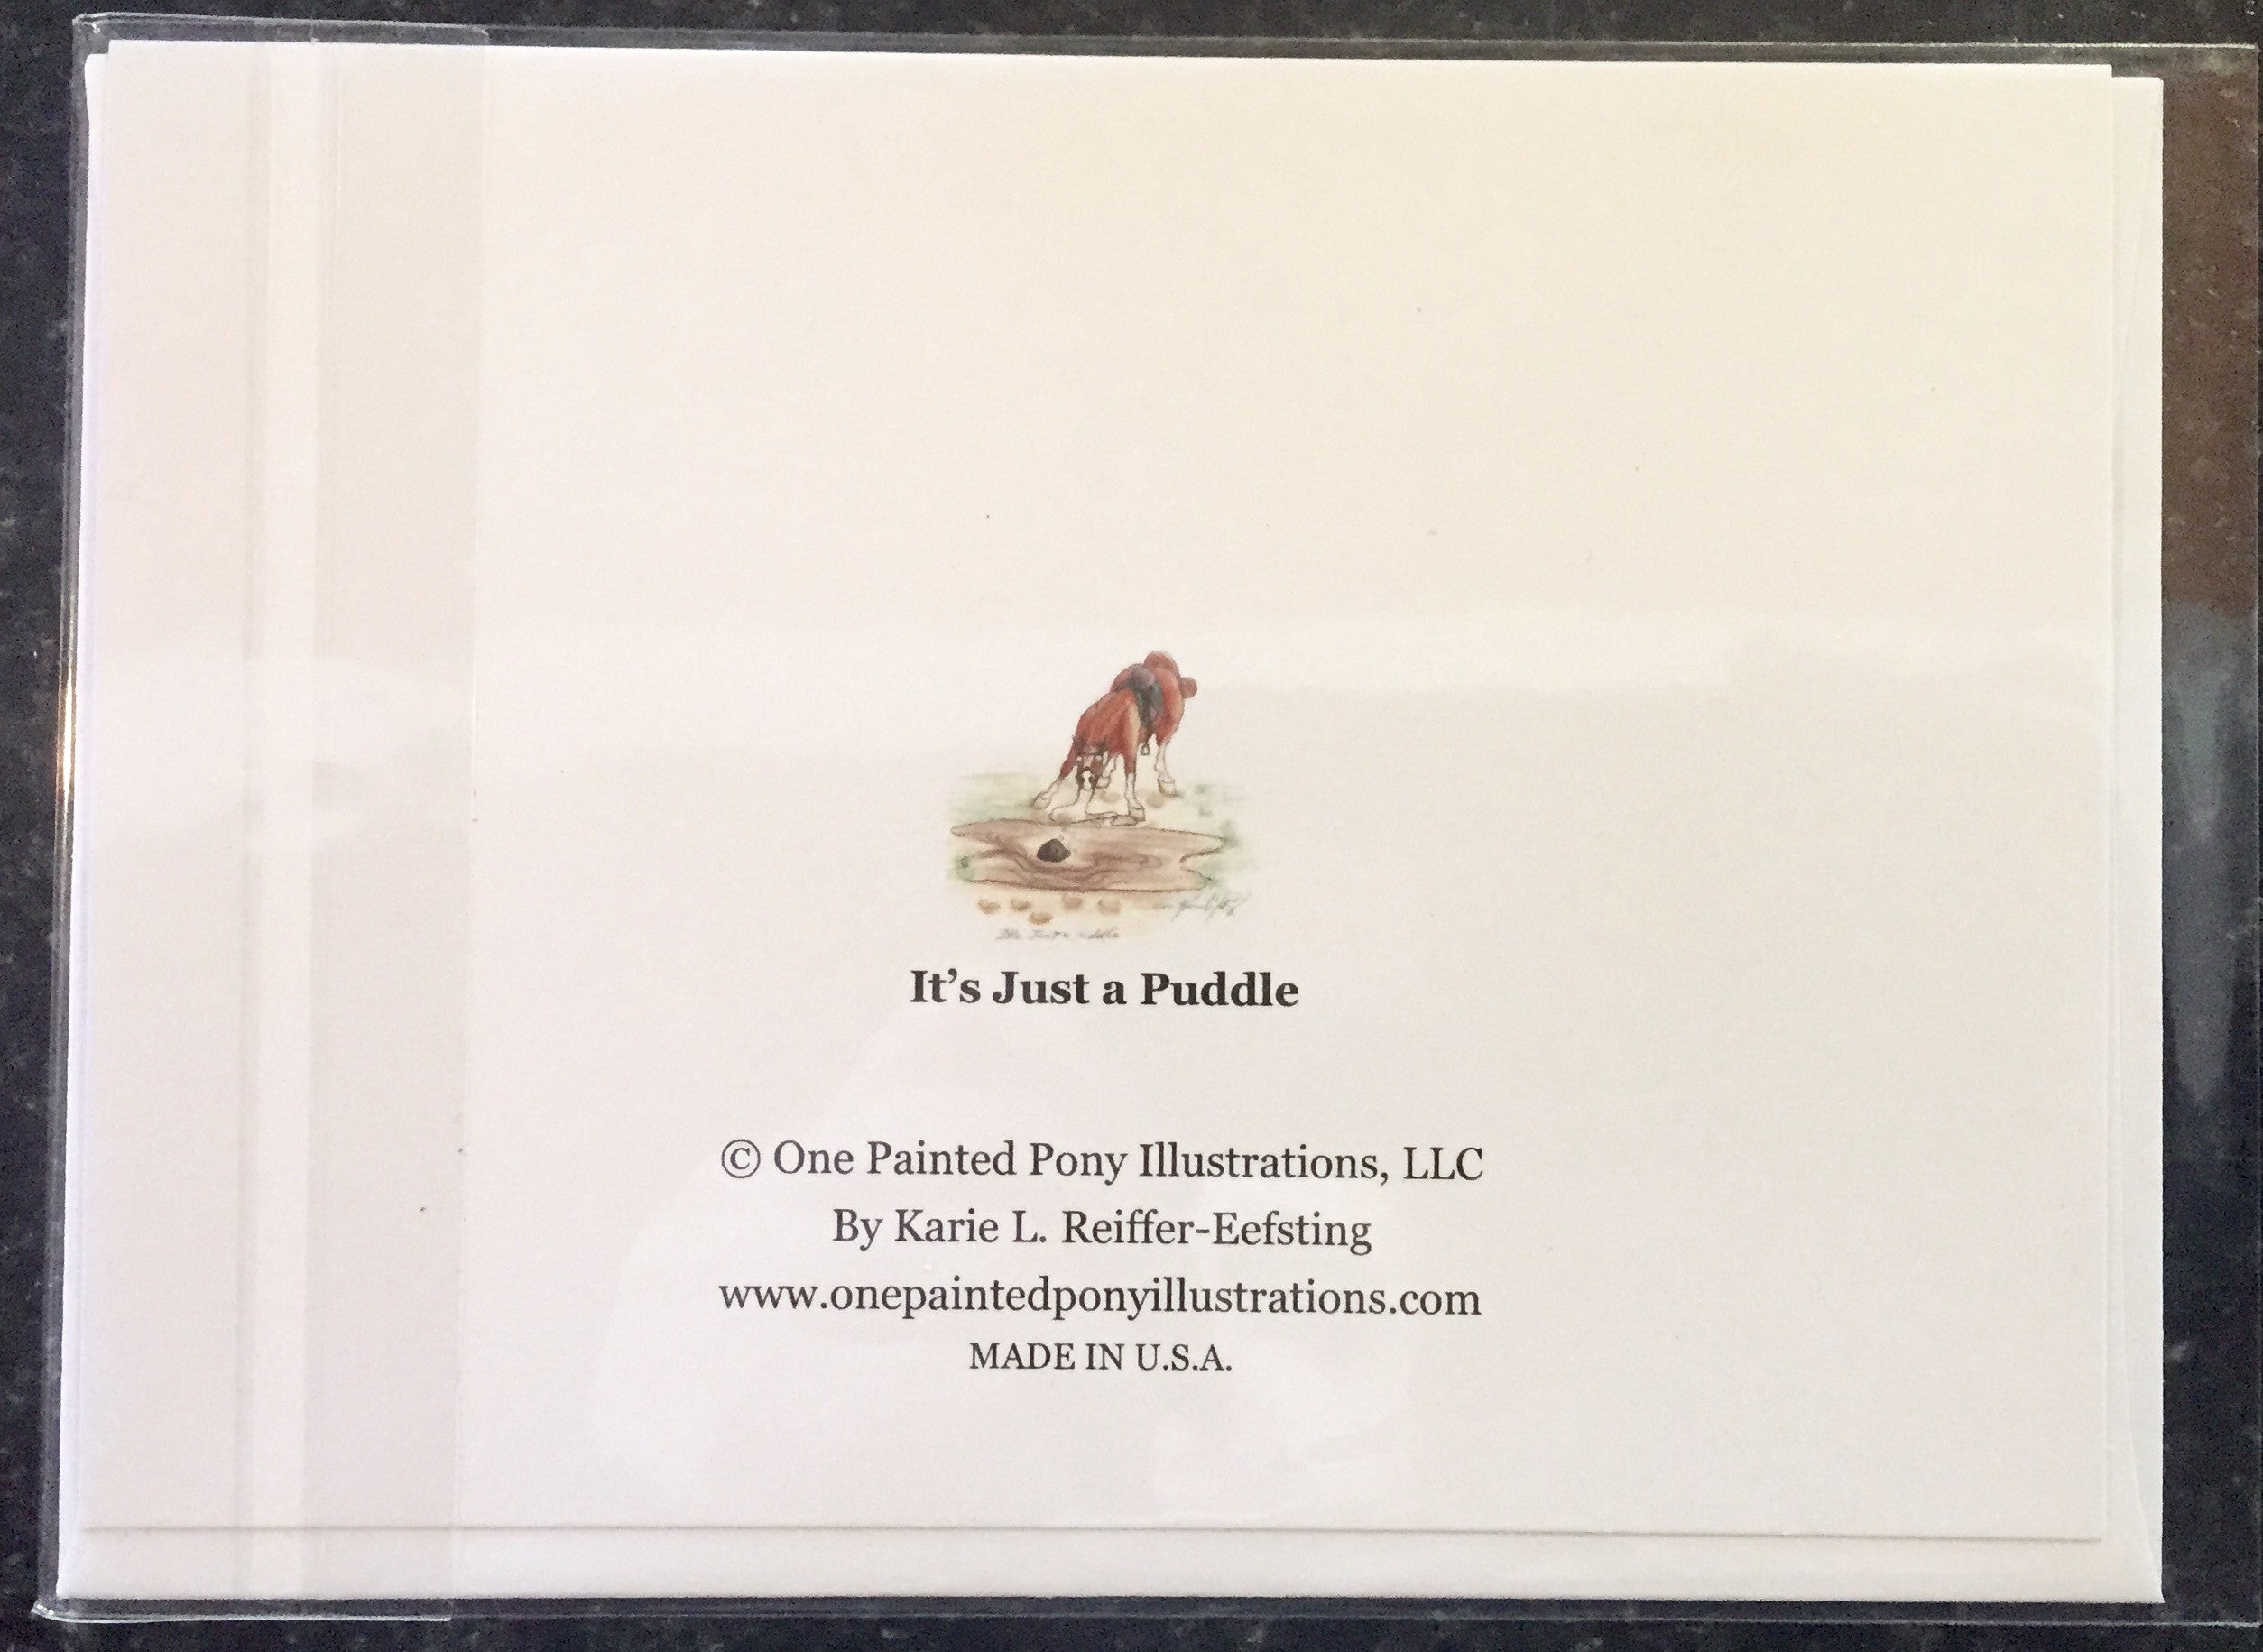 One Painted Pony Illustrations Gift Card "It's Just a Puddle" - Horse & Hound Tack Shop & Pet Supply